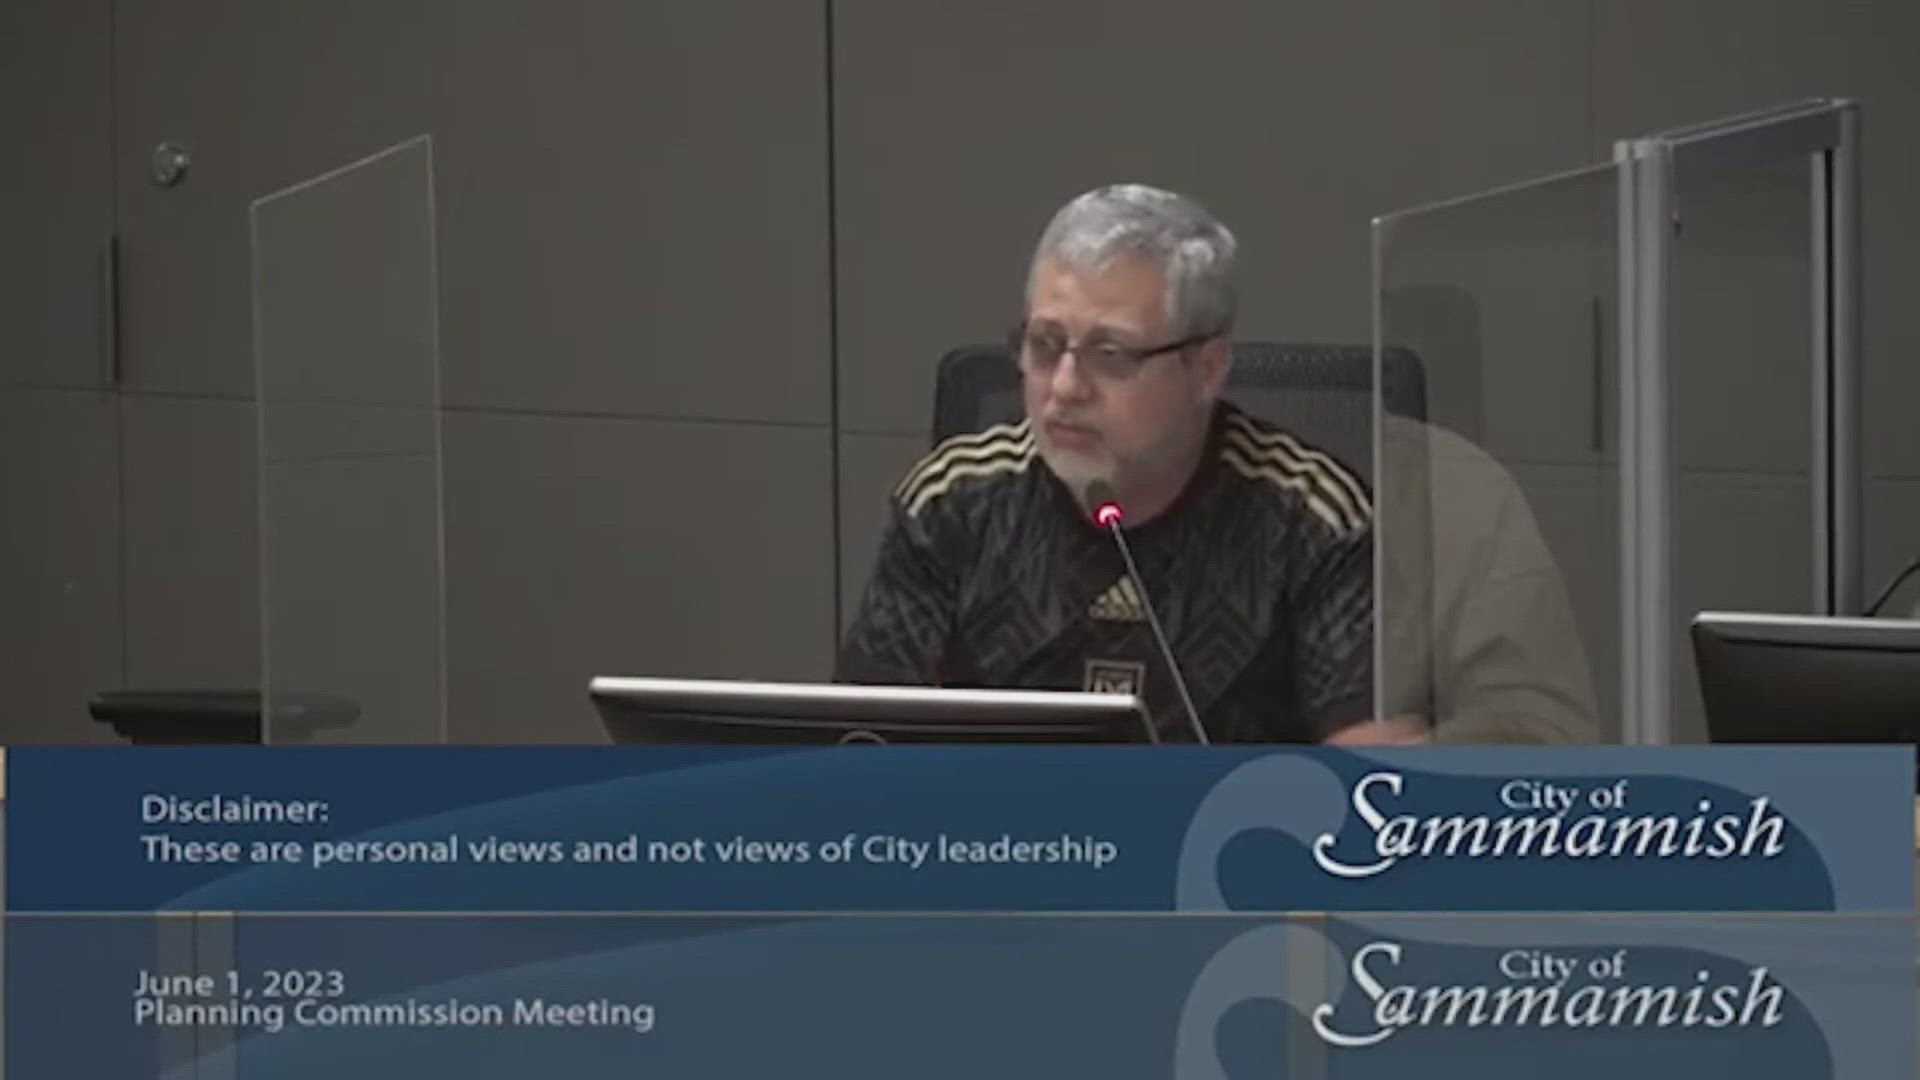 A Sammamish planning commissioner who made anti-LGBTQ+ remarks during a meeting last week has resigned.